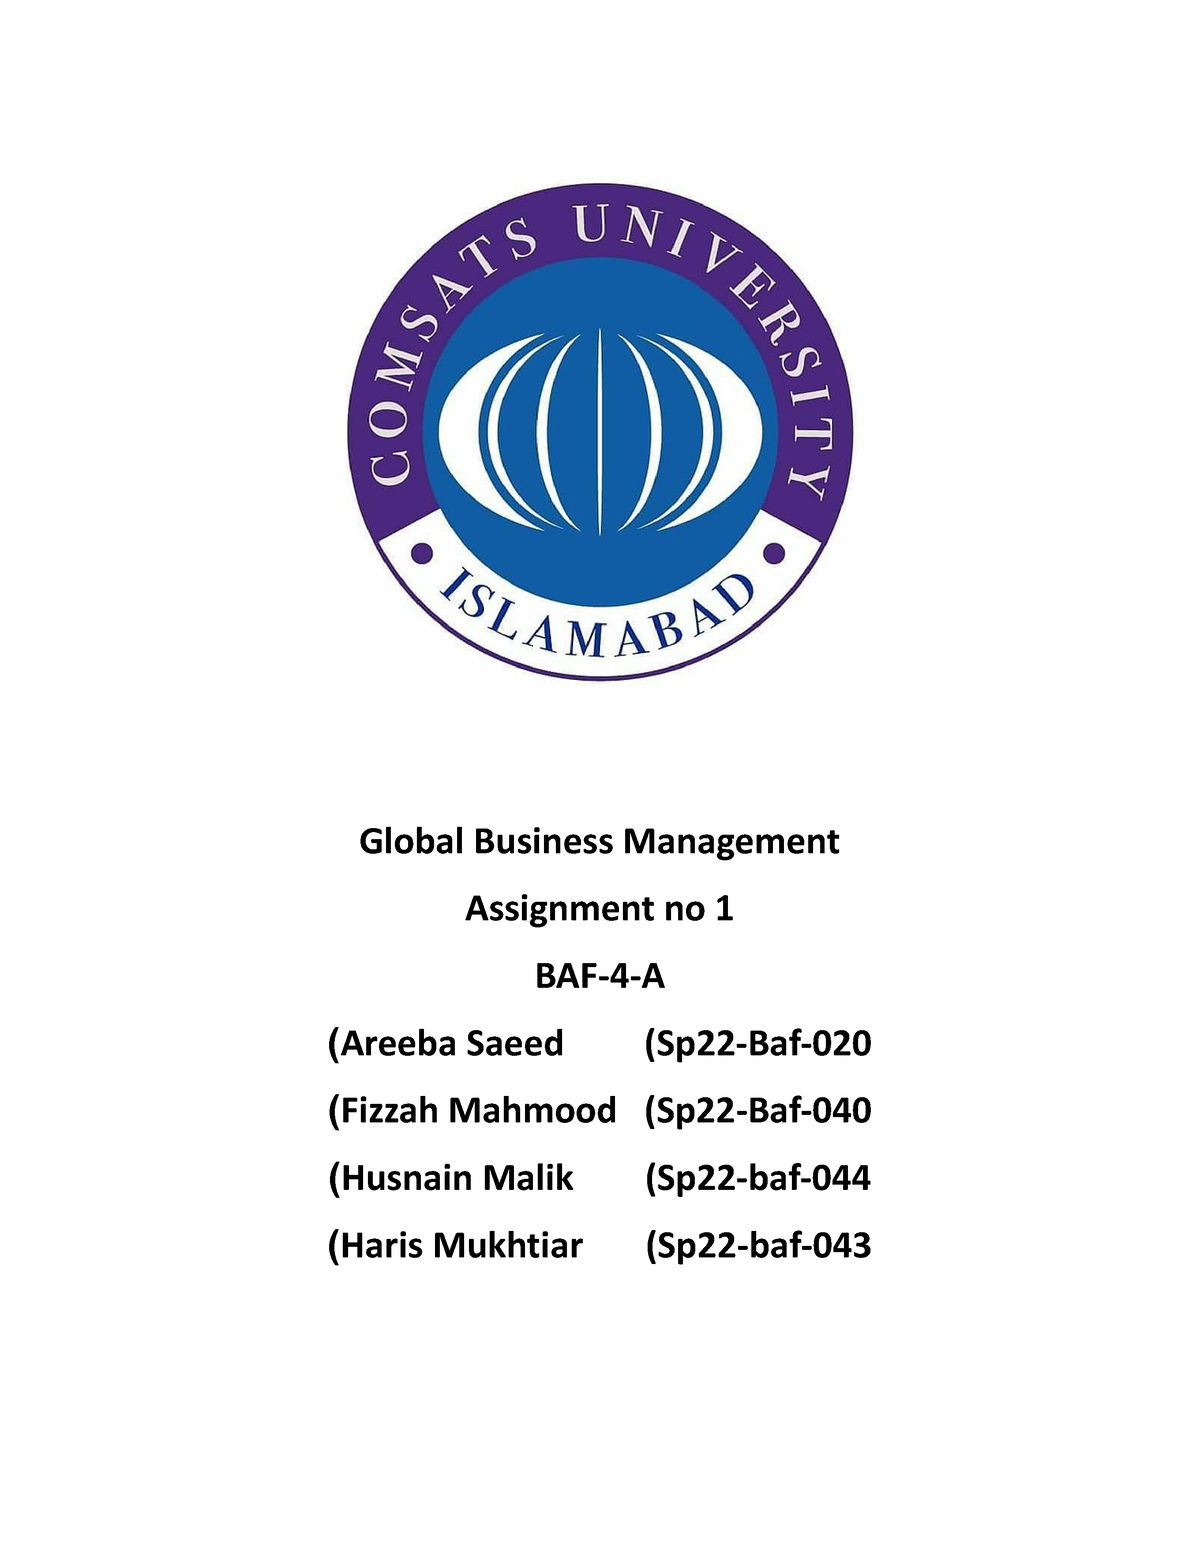 chapter 3 assignment global business